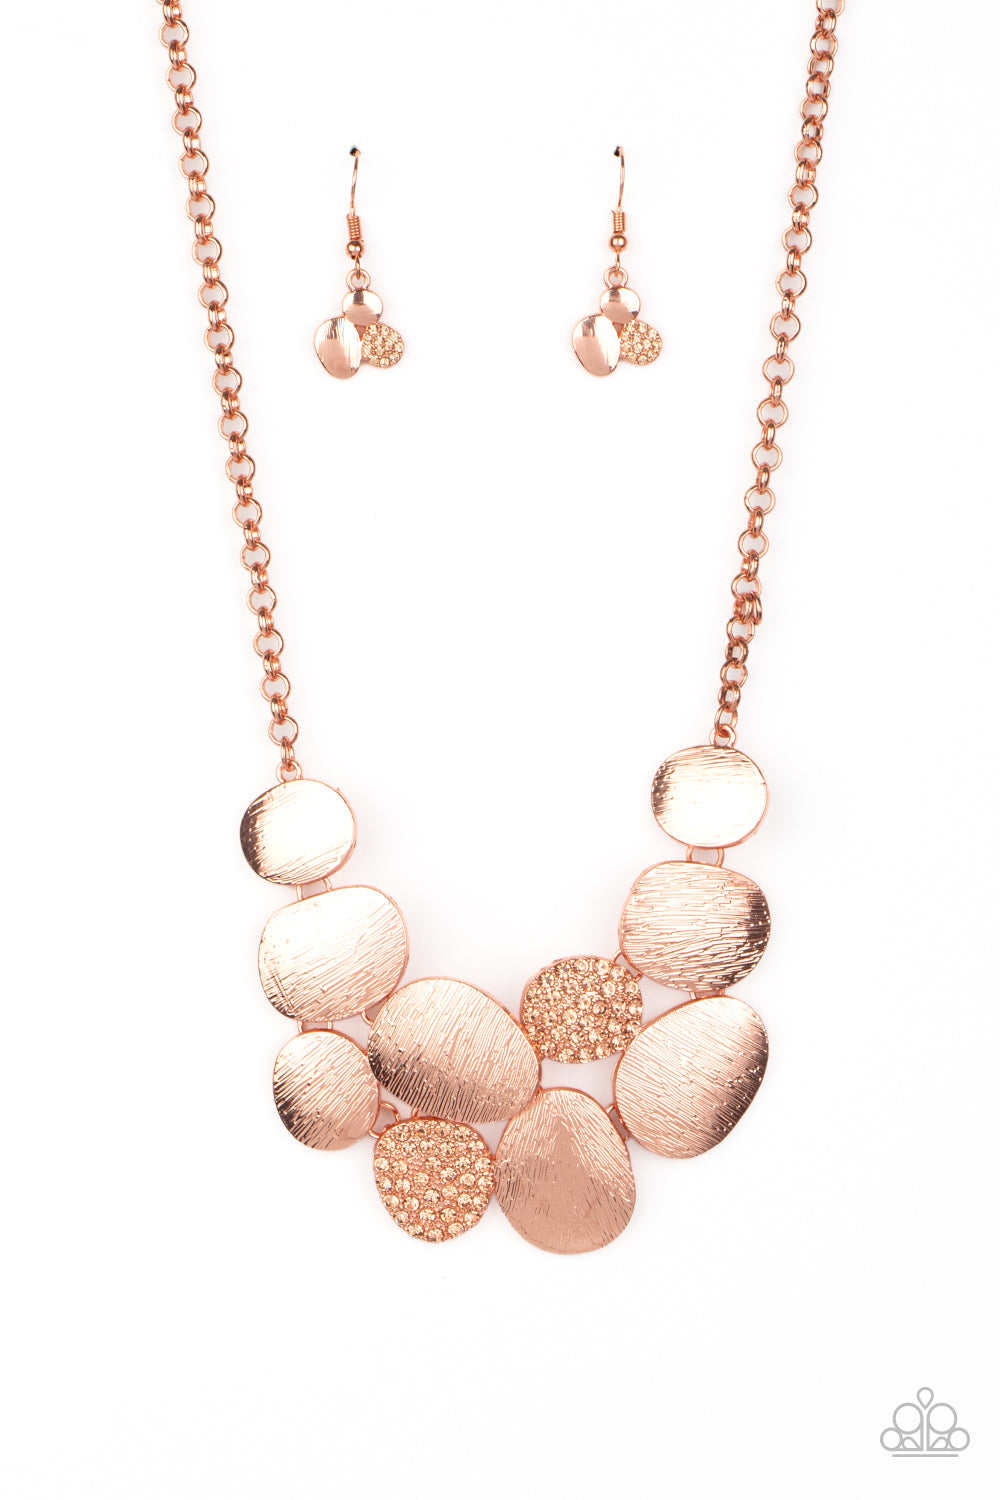 Paparazzi Accessories - A Hard LUXE Story #N488- Copper Necklace